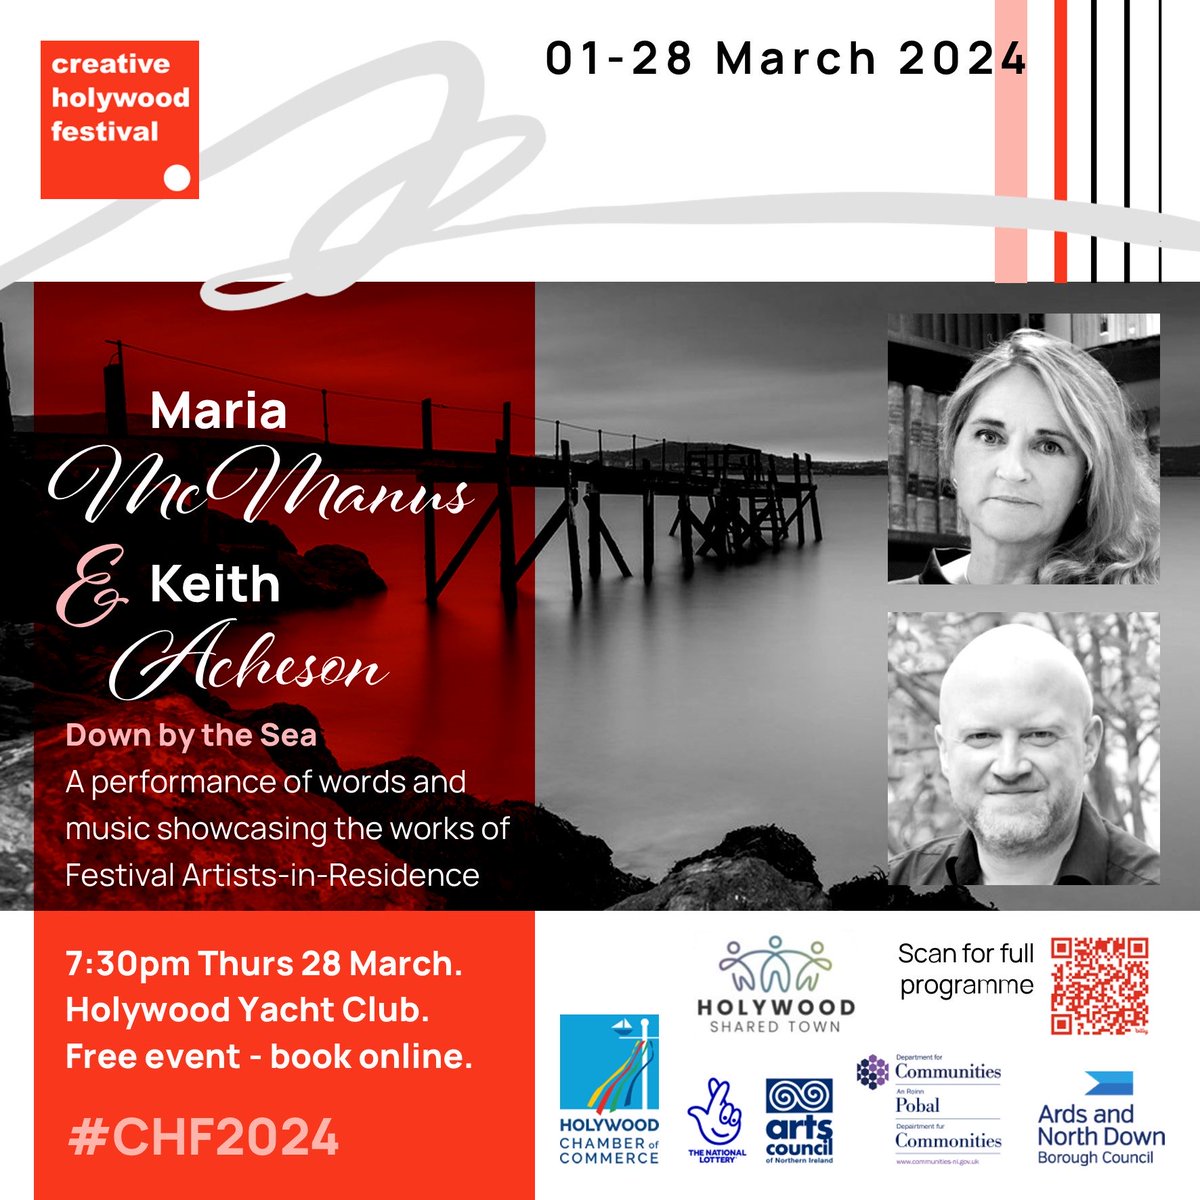 Creative Holywood Festival Artists-in-Residents perform work they’ve created across March. Poet ⁦@maria_mcmanus⁩ & composer ⁦@Keith_Acheson⁩ Free event Thursday 28th 7.30pm ticketsource.co.uk/creativeholywo…